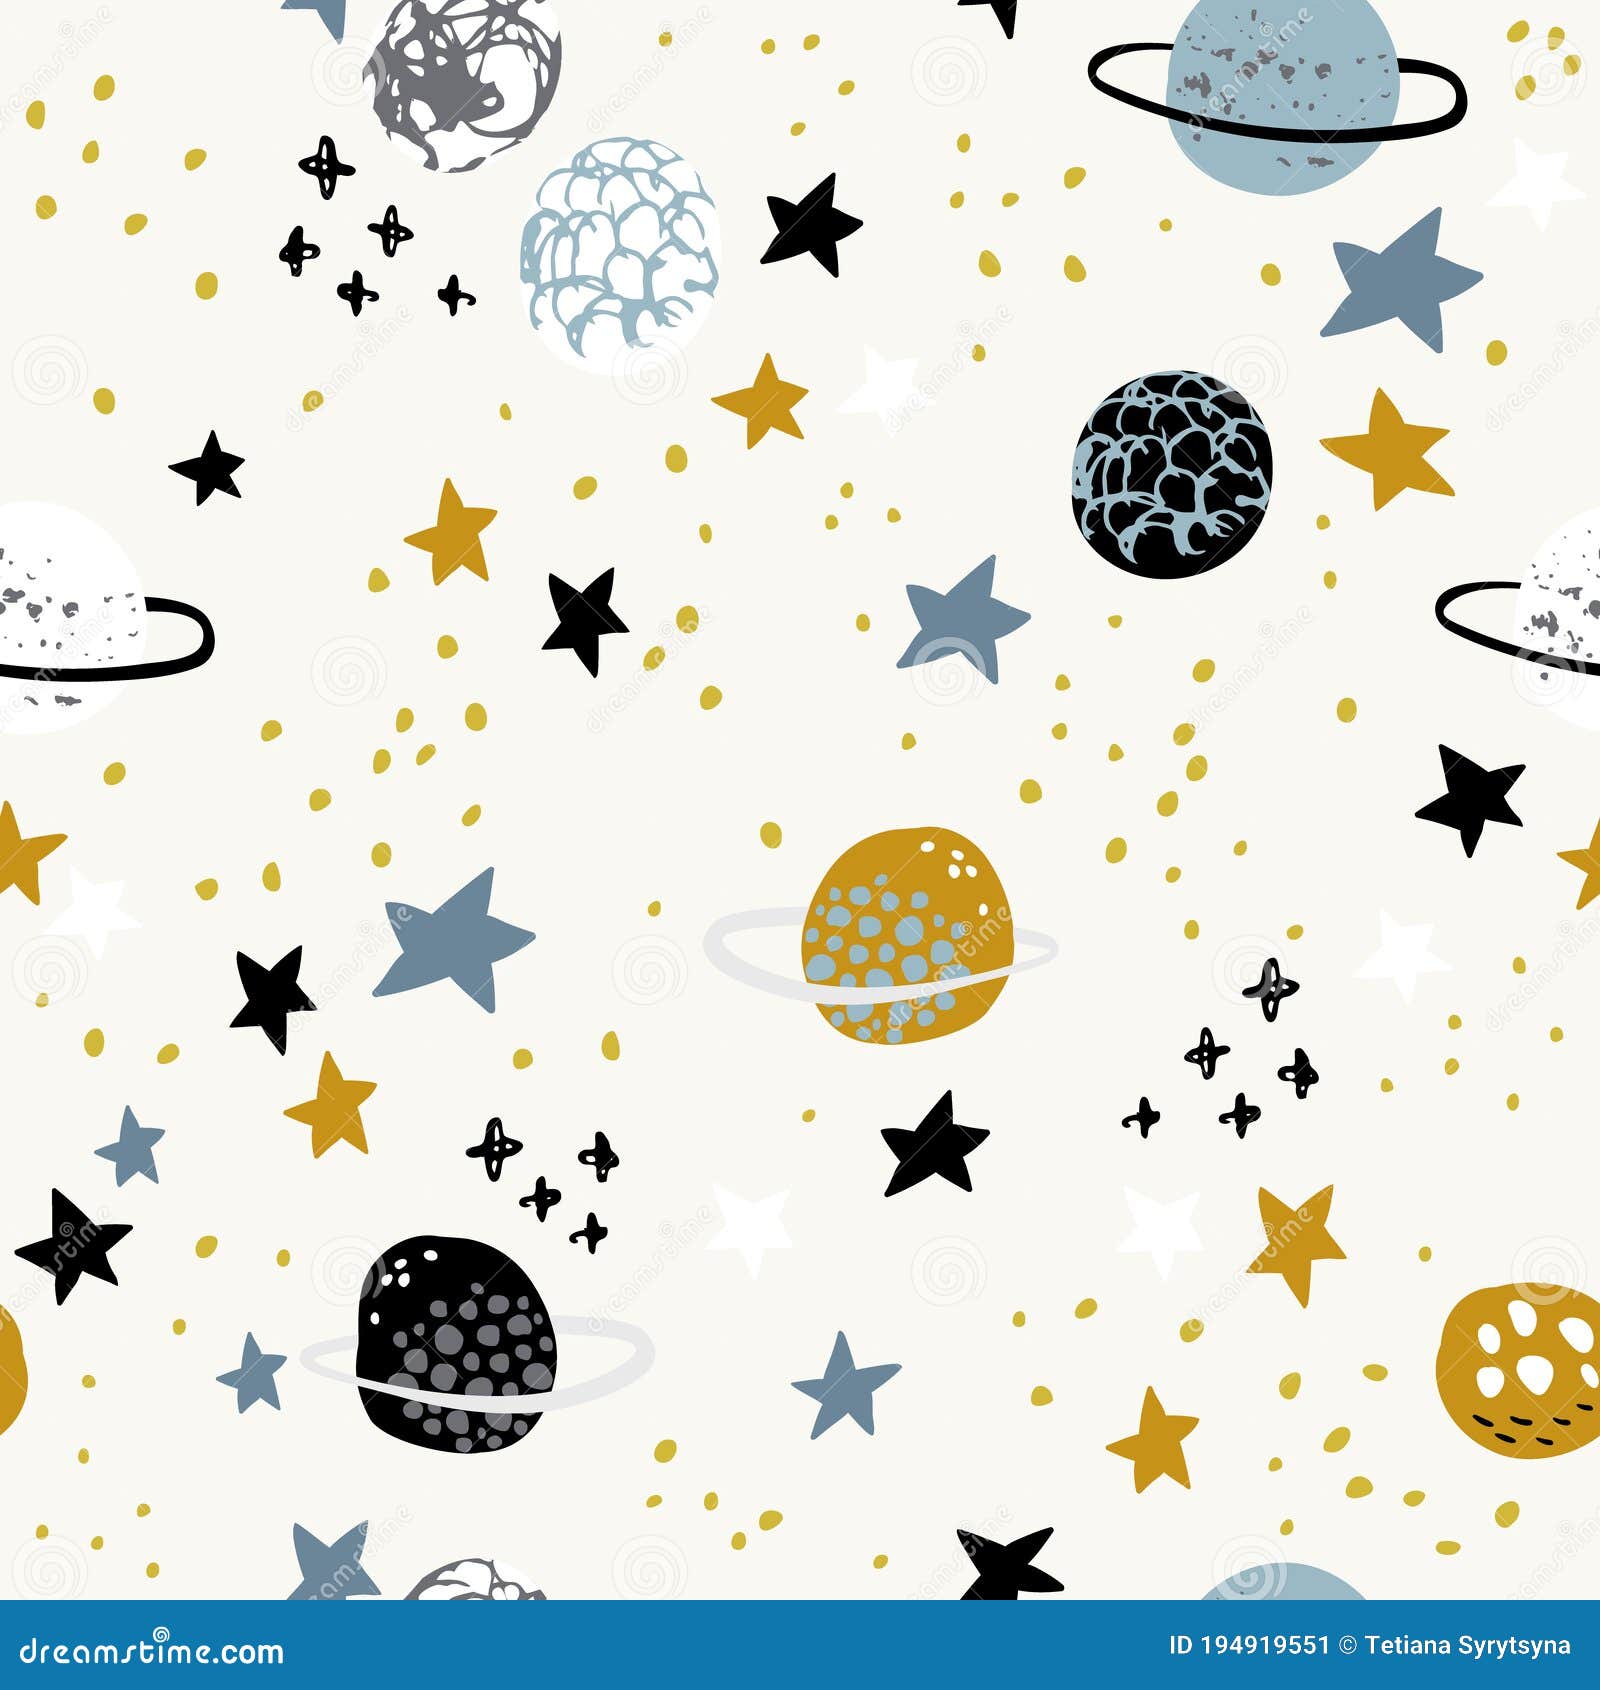 Cartoon Space Themed Background: Cute Planets, Moon, Stars, Galaxy, Milky  Way with Grunge, Doodle Textures Stock Vector - Illustration of cosmic,  moon: 194919551